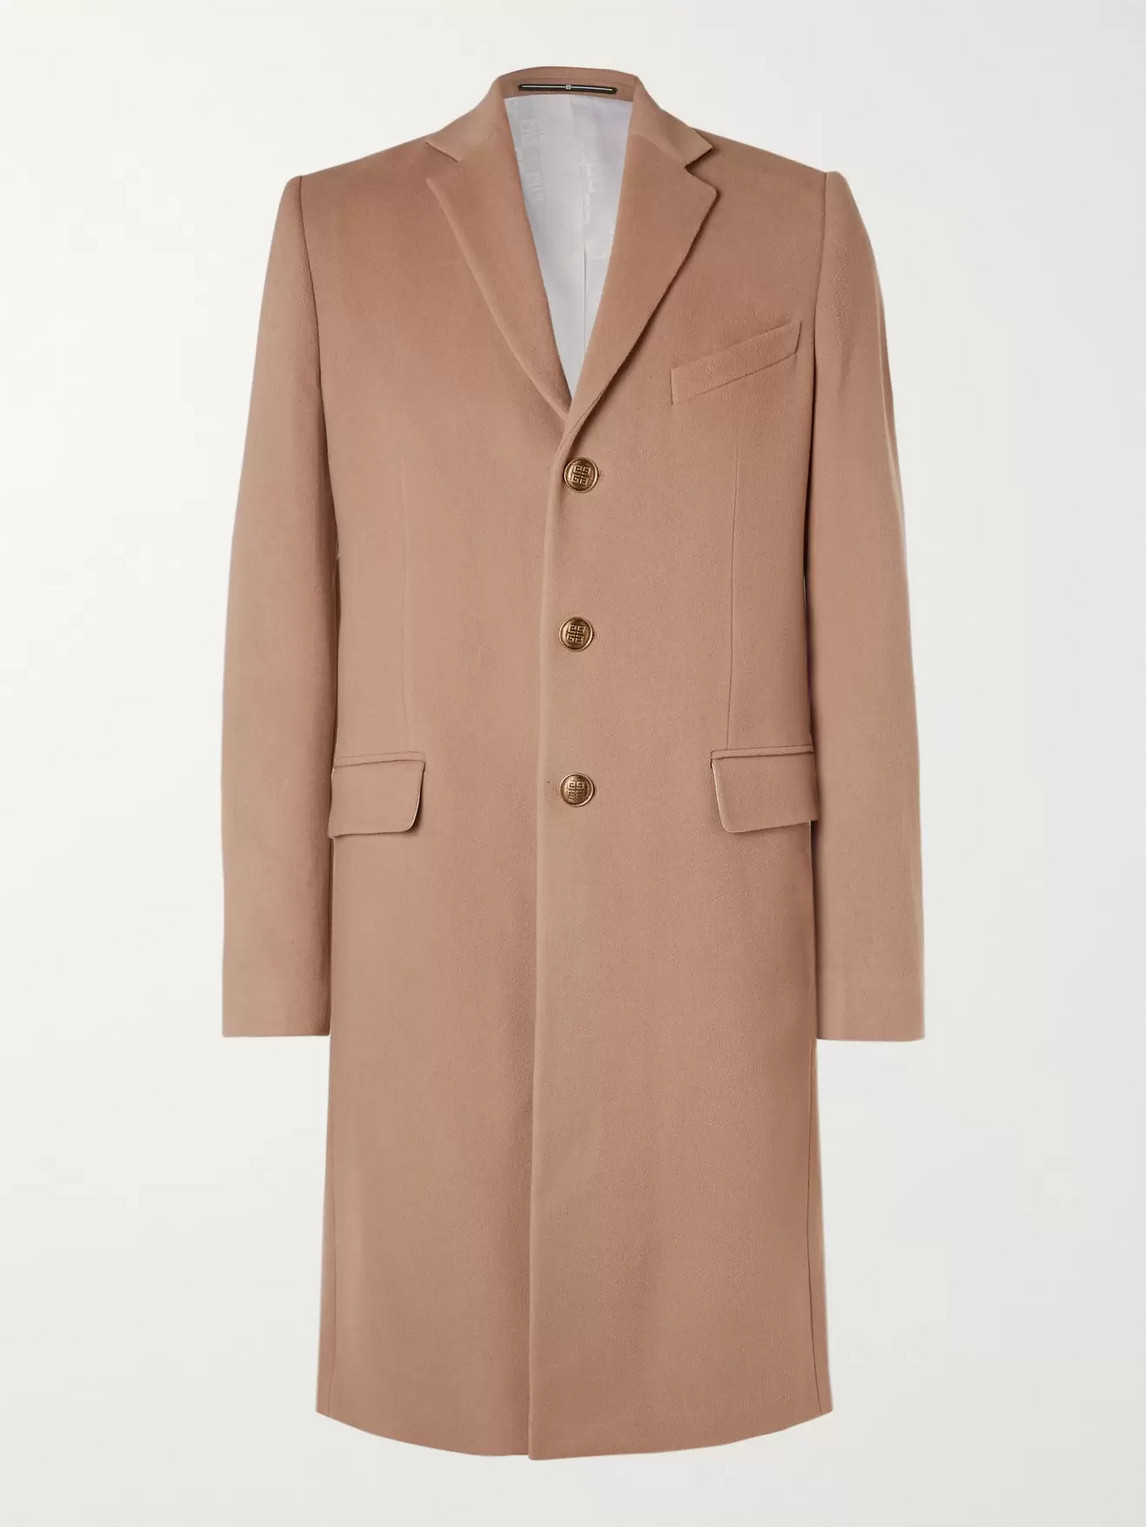 GIVENCHY SLIM-FIT WOOL AND CASHMERE-BLEND COAT